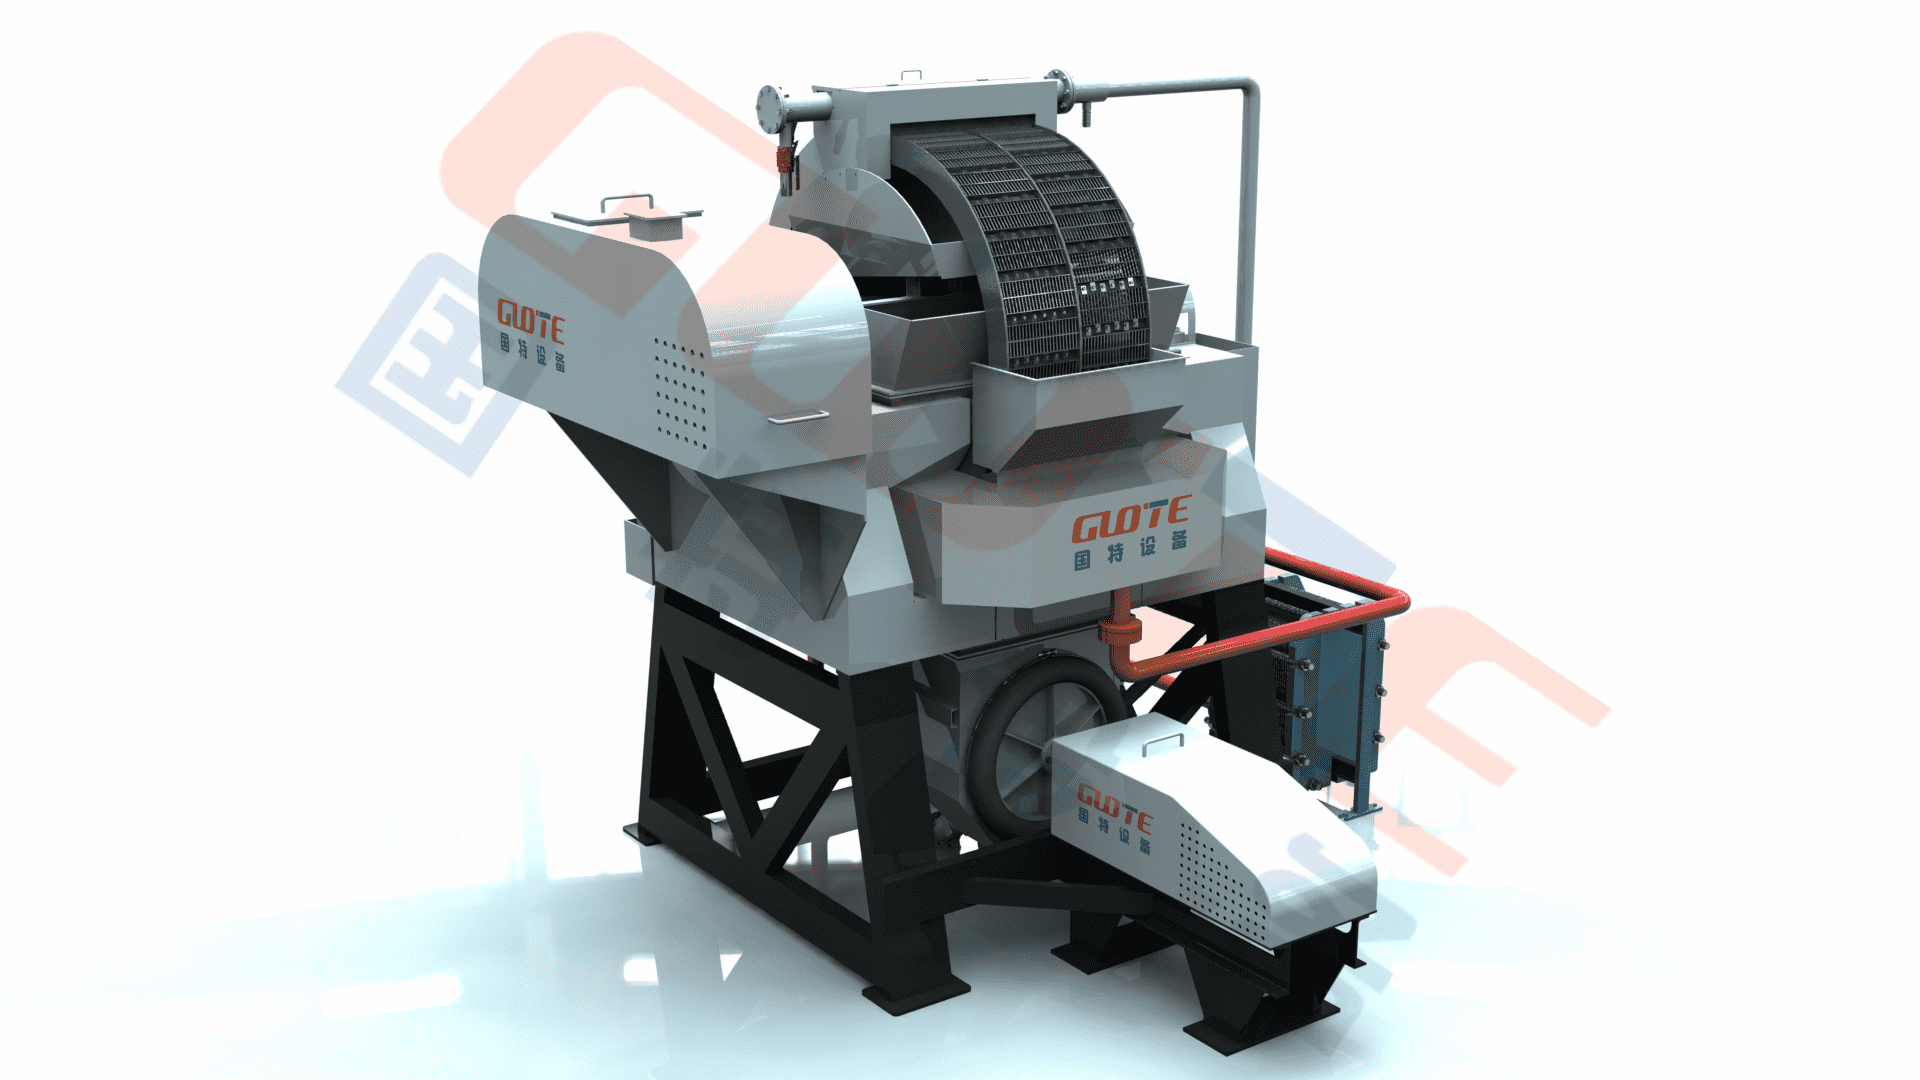 Factory source Magnetic Separator For Iron Sand - Reasonable price China Good Quality Wet Magnetic Separator From Jxsc Mining Machinery Factory – Guote